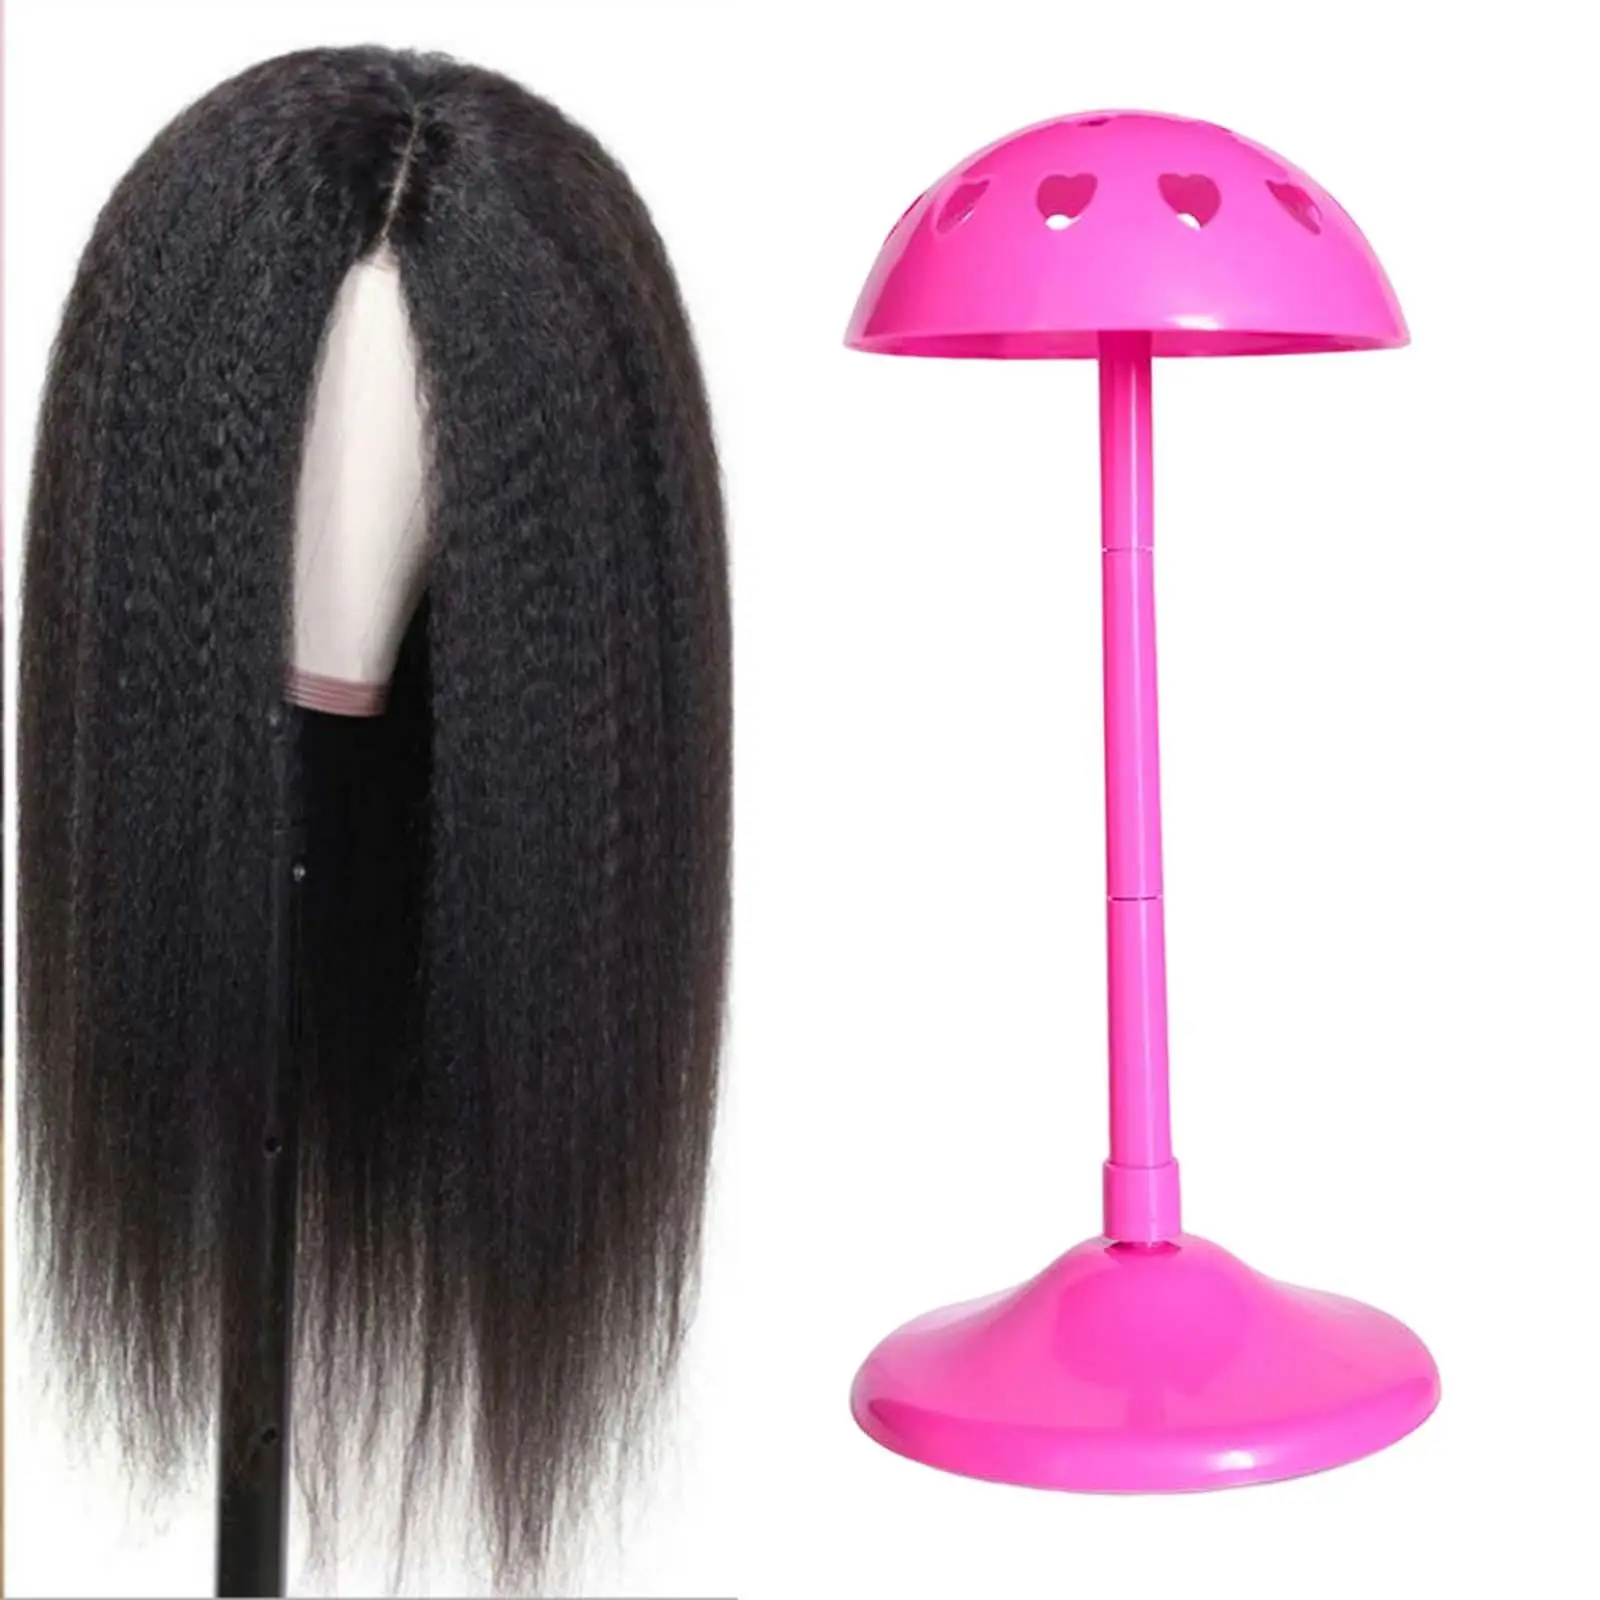 Wig Stand Shelf Removable Design Dome Top Accessories Portable for Hair Styling Drying Hat Storage